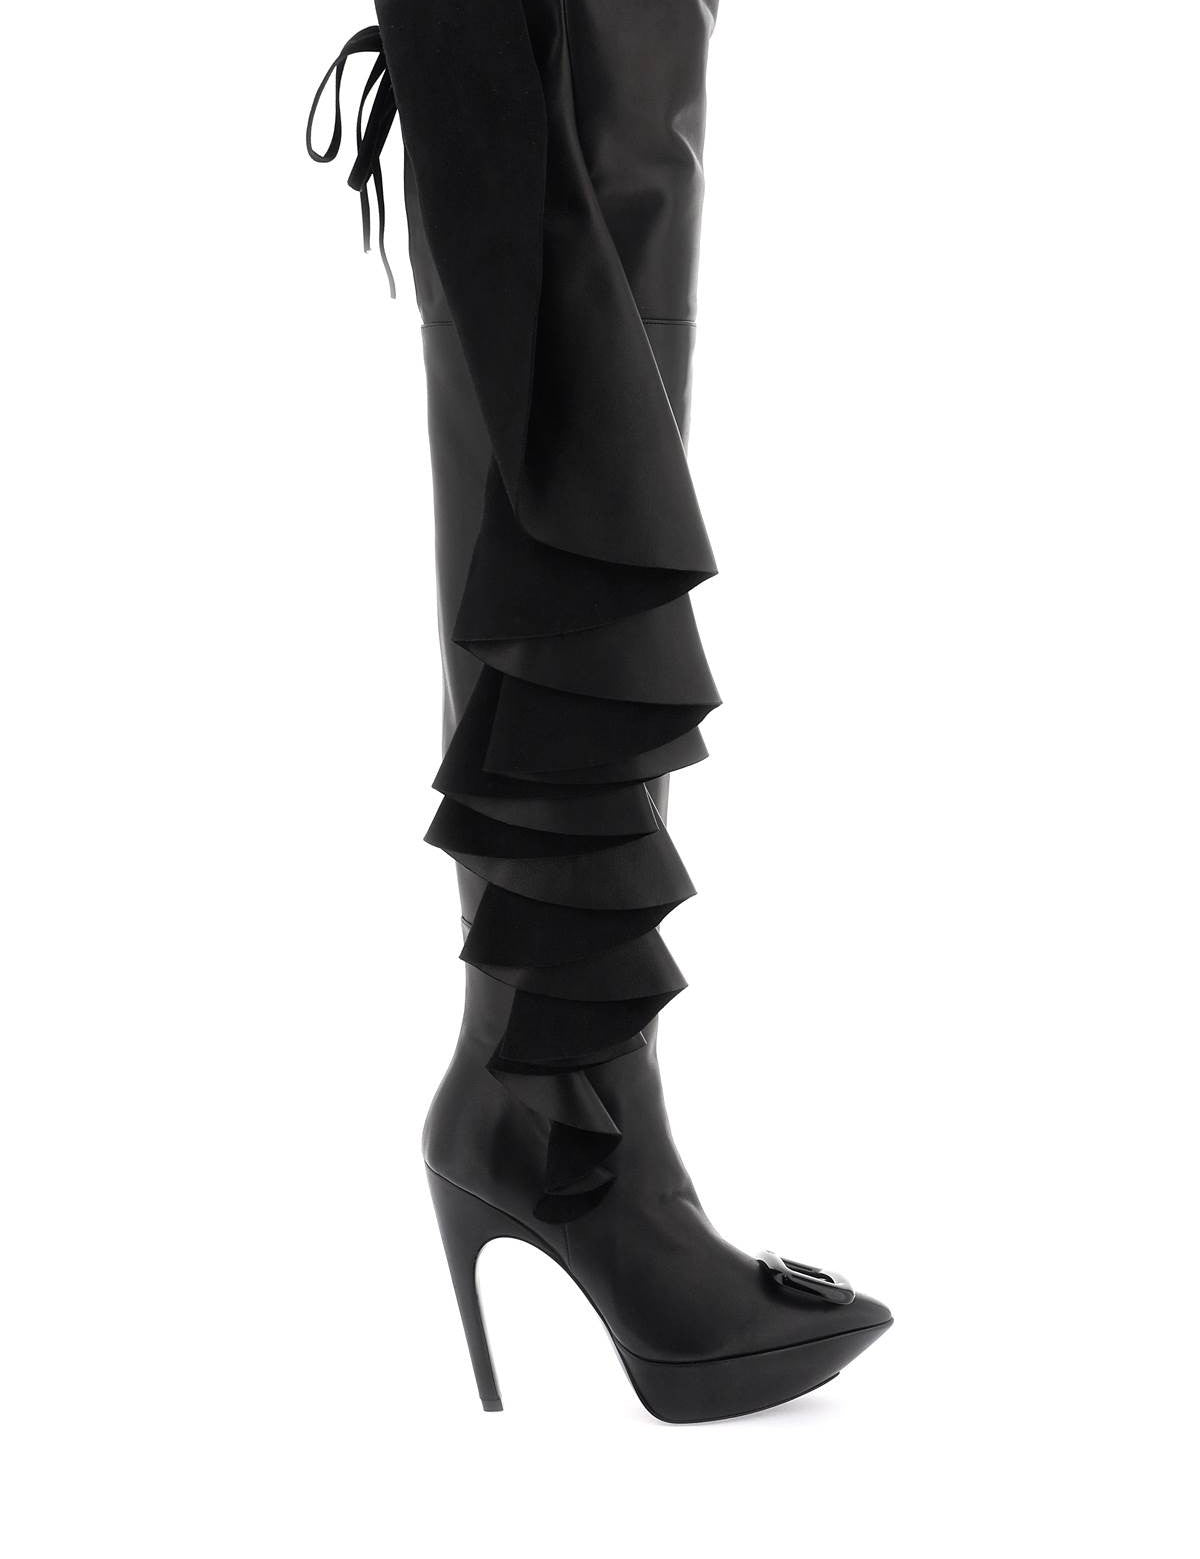 roger-vivier-choc-buckle-boots-with-ruffles.jpg